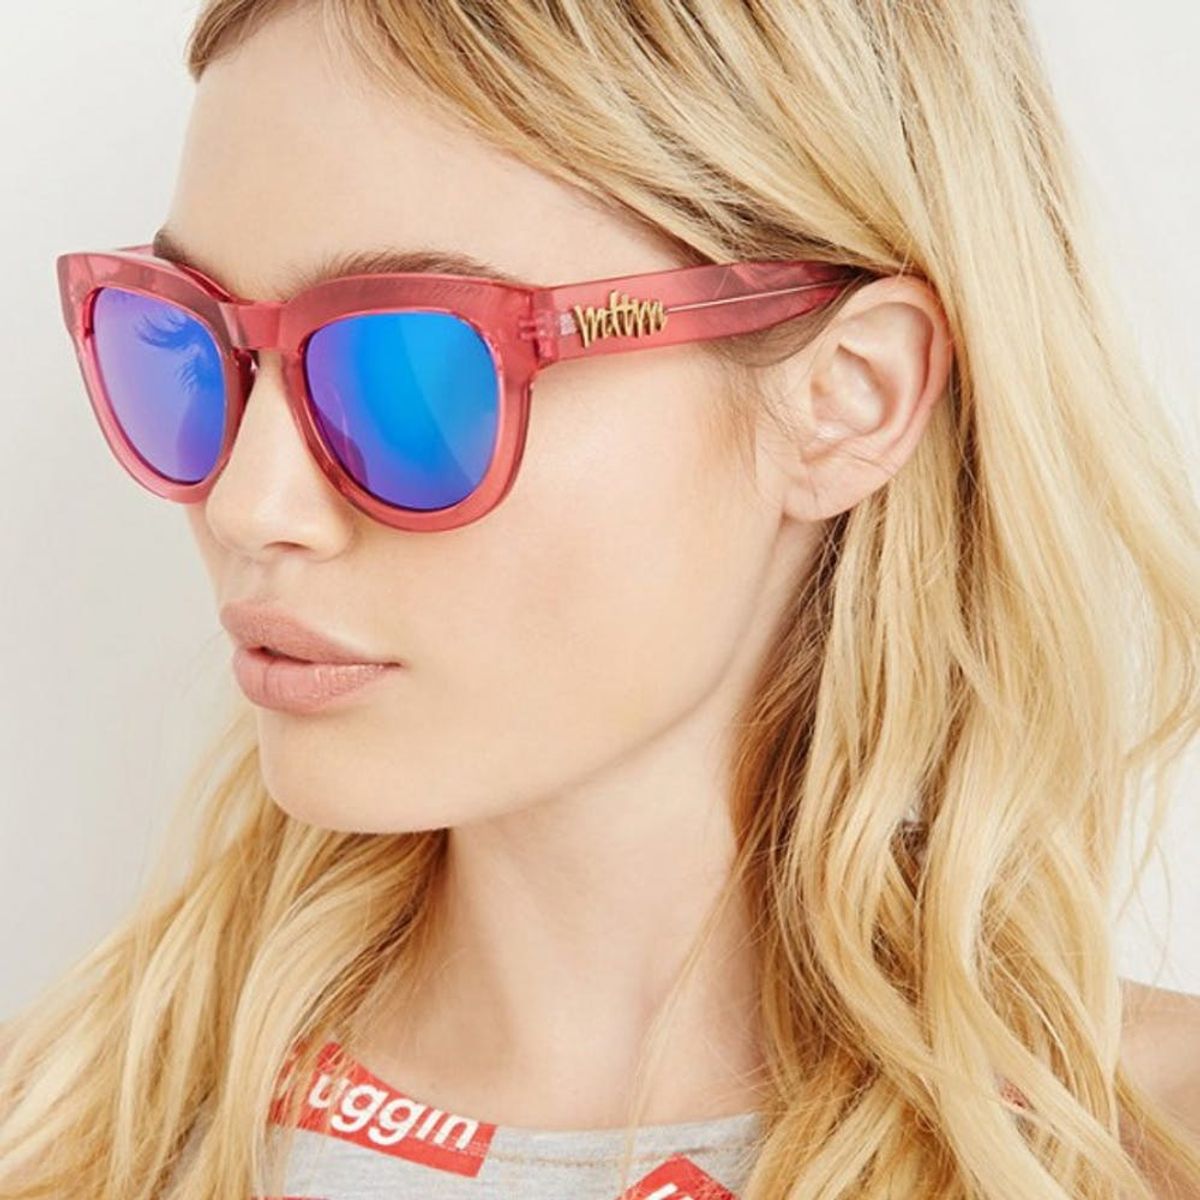 17 of the Most Colorful Sunglasses Ever Under $100